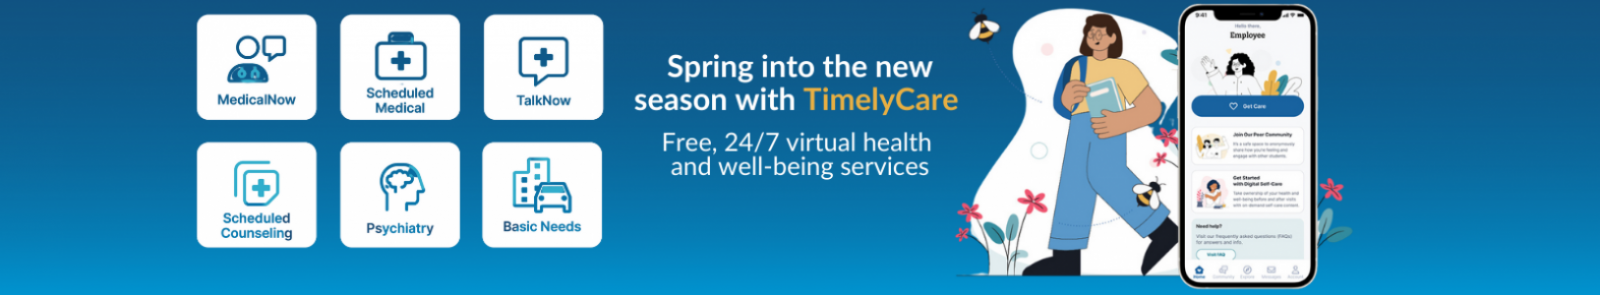 timelycare - free, 24/7 virtual health and well-being services at your fingertips. Download the TimelyCare App Today!